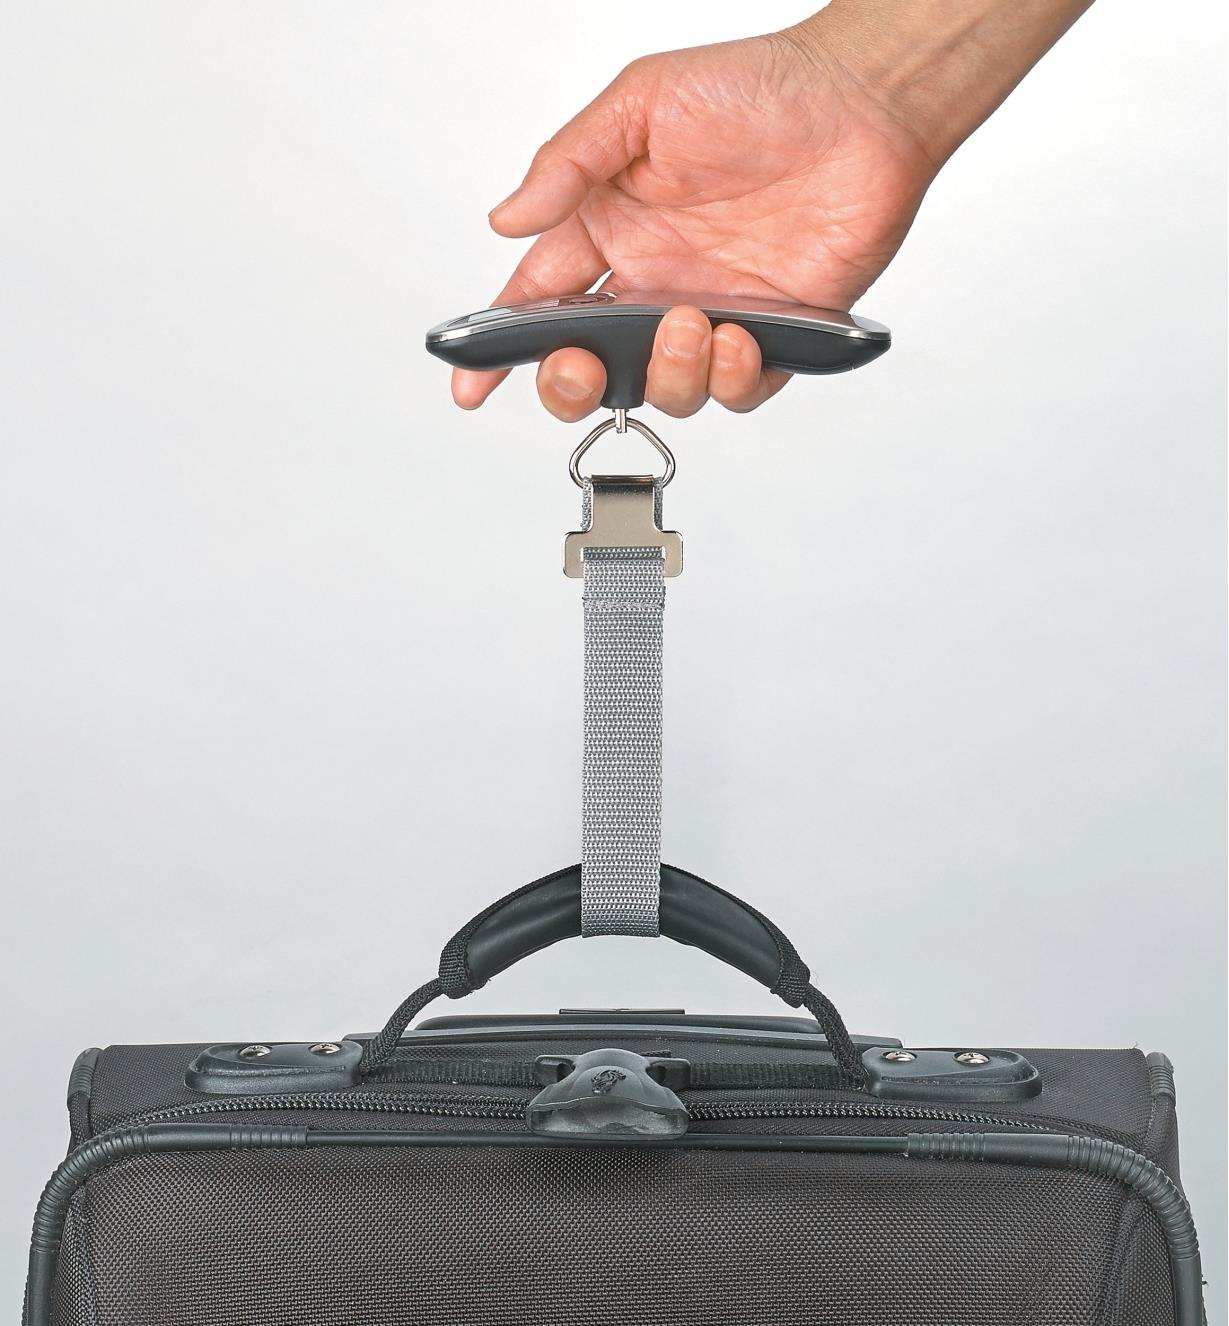 Digital Luggage Scale weighing a suitcase